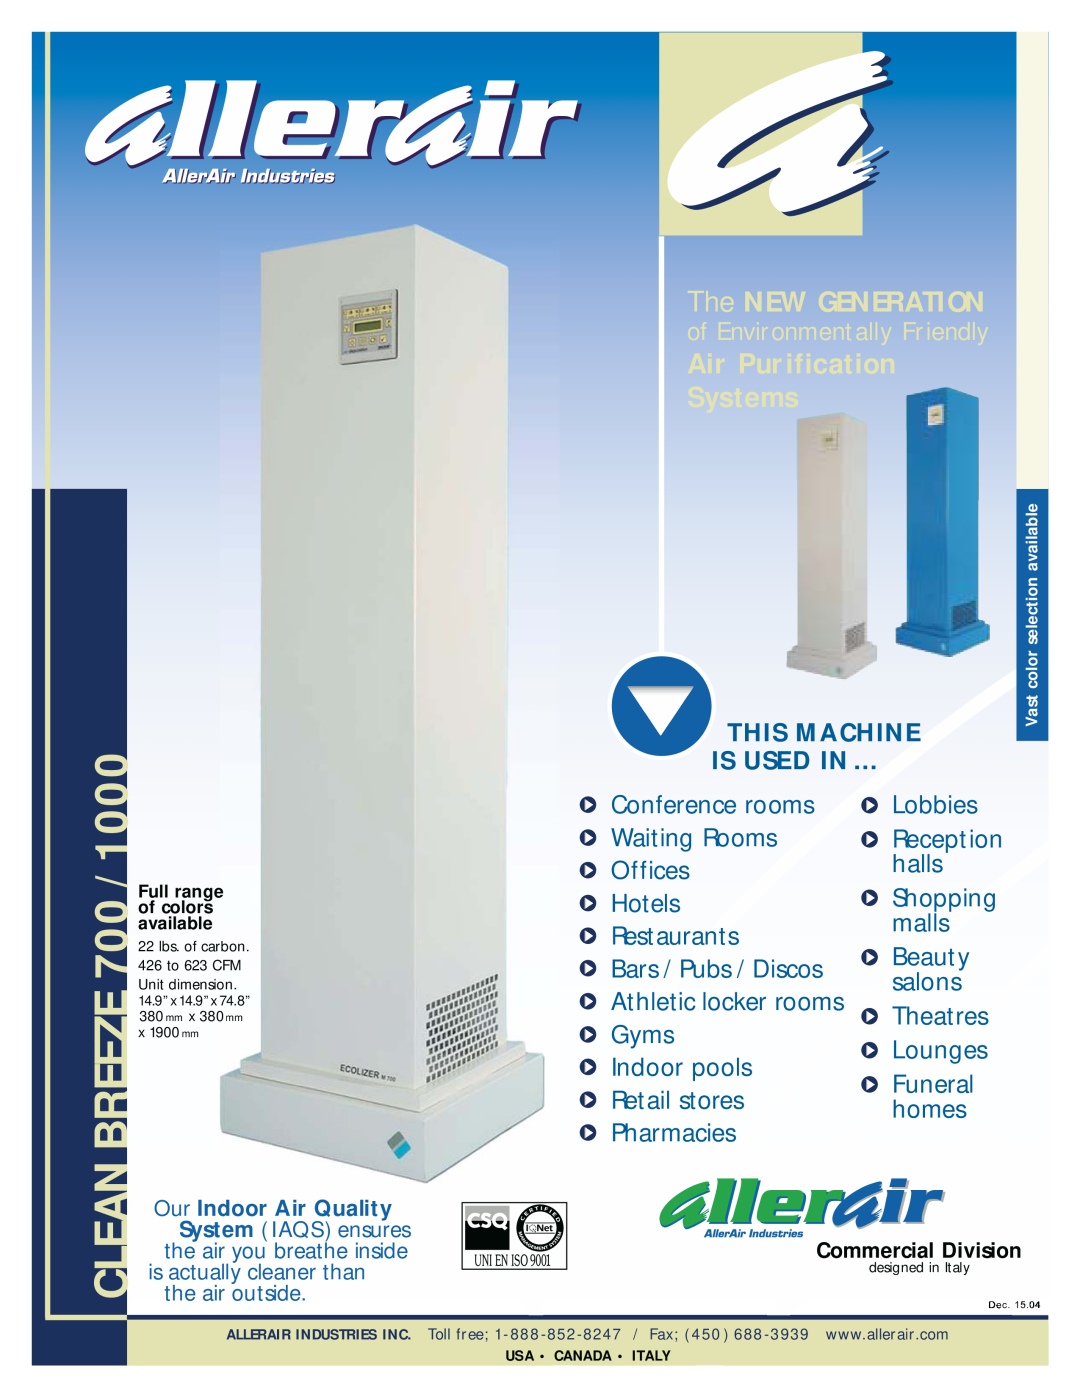 AllerAir 700/1000 manual Breeze, Clean, Air Purification Systems, The NEW GENERATION, of Environmentally Friendly 